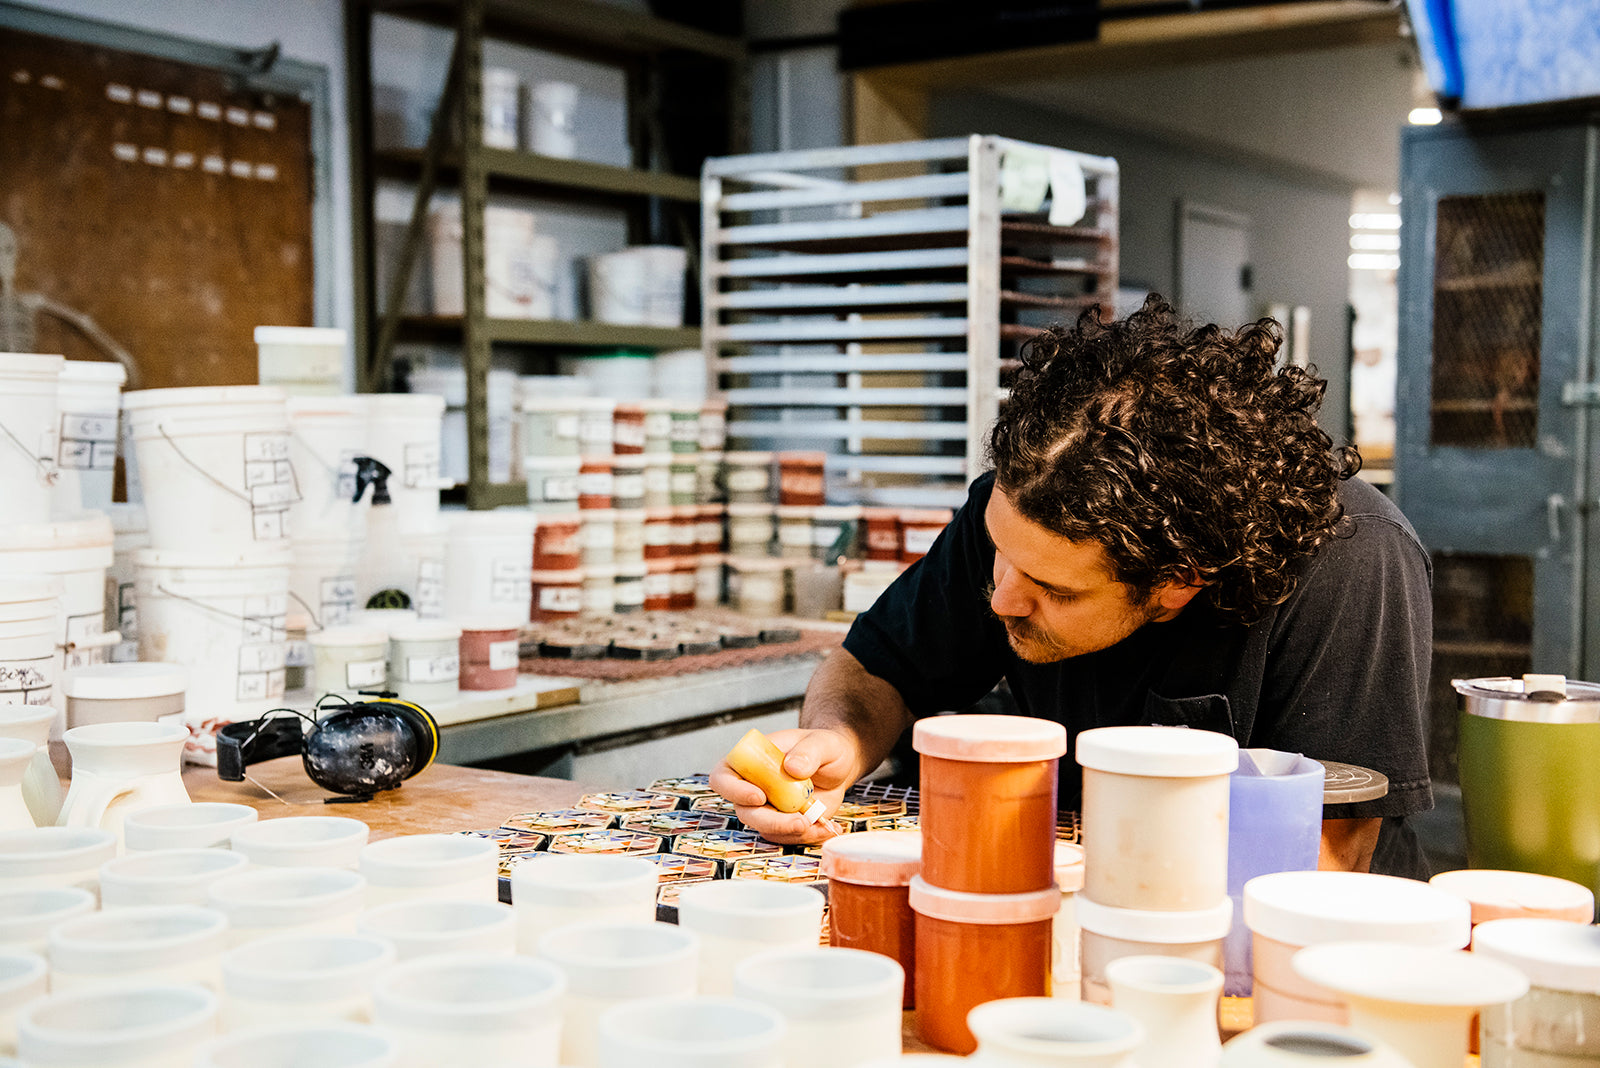 Pewabic artist Seamus hand-painting a batch of Hex Paperweights in the production space.